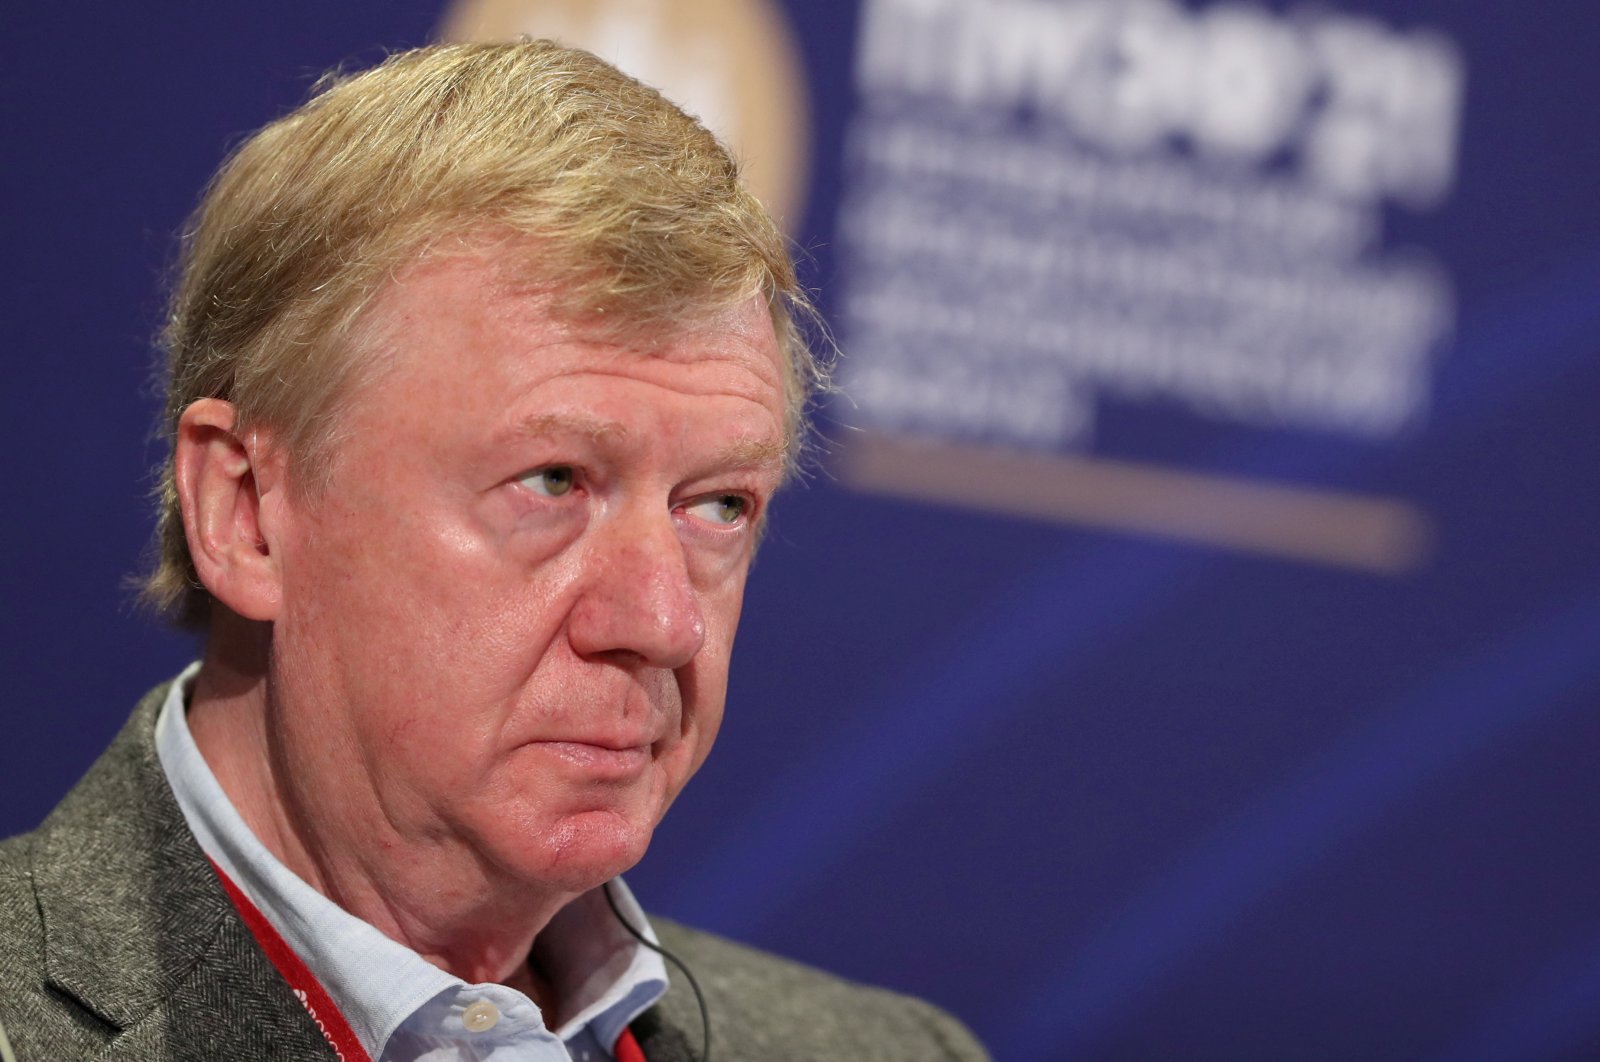 Anatoly Chubais, special representative of Russian President Vladimir Putin, attends a session of the St. Petersburg International Economic Forum (SPIEF) in Saint Petersburg, Russia, June 3, 2021. (Reuters Photo)